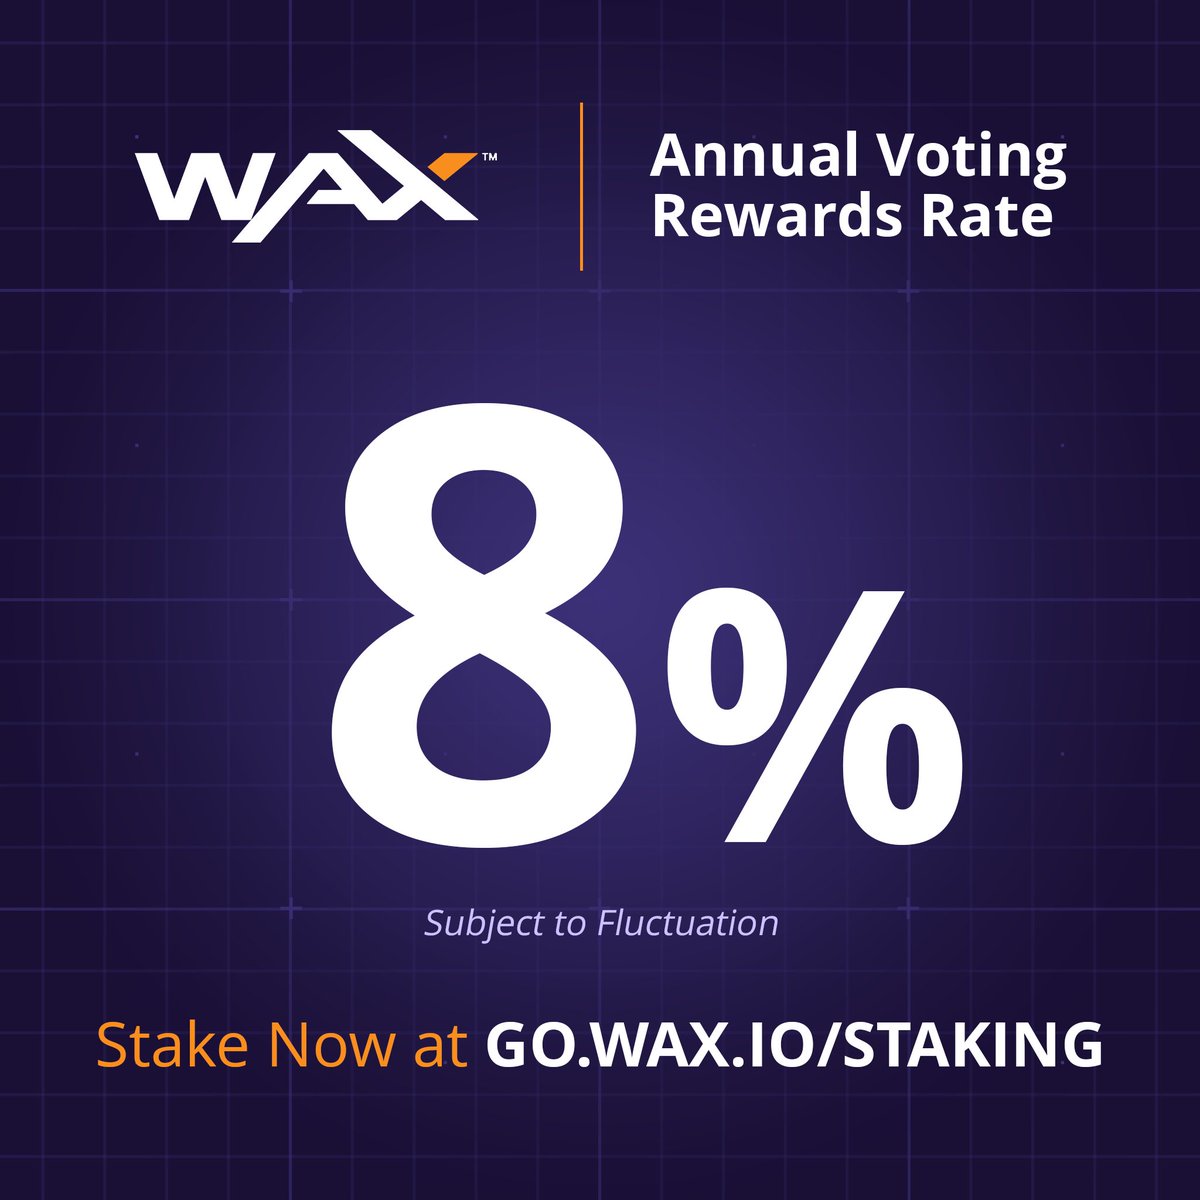 With an impressive Annual Voting Rewards Rate of around ~8%, there's no time to waste. 

Stake your $WAXP now at go.wax.io/staking. @WAX_io #WAXNFT